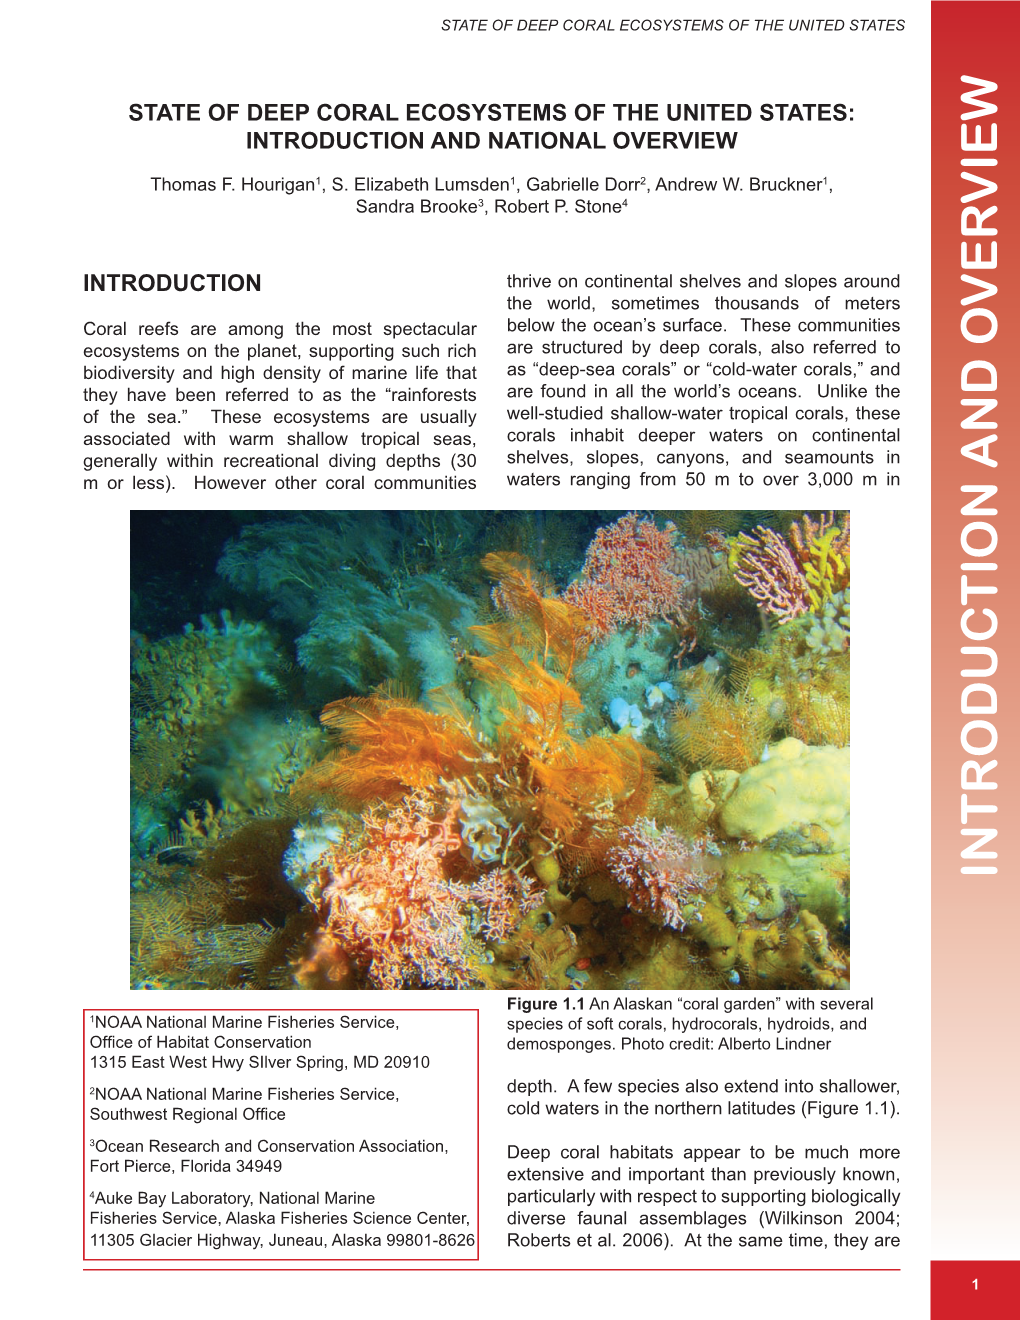 State of Deep Coral Ecosystems of the United States